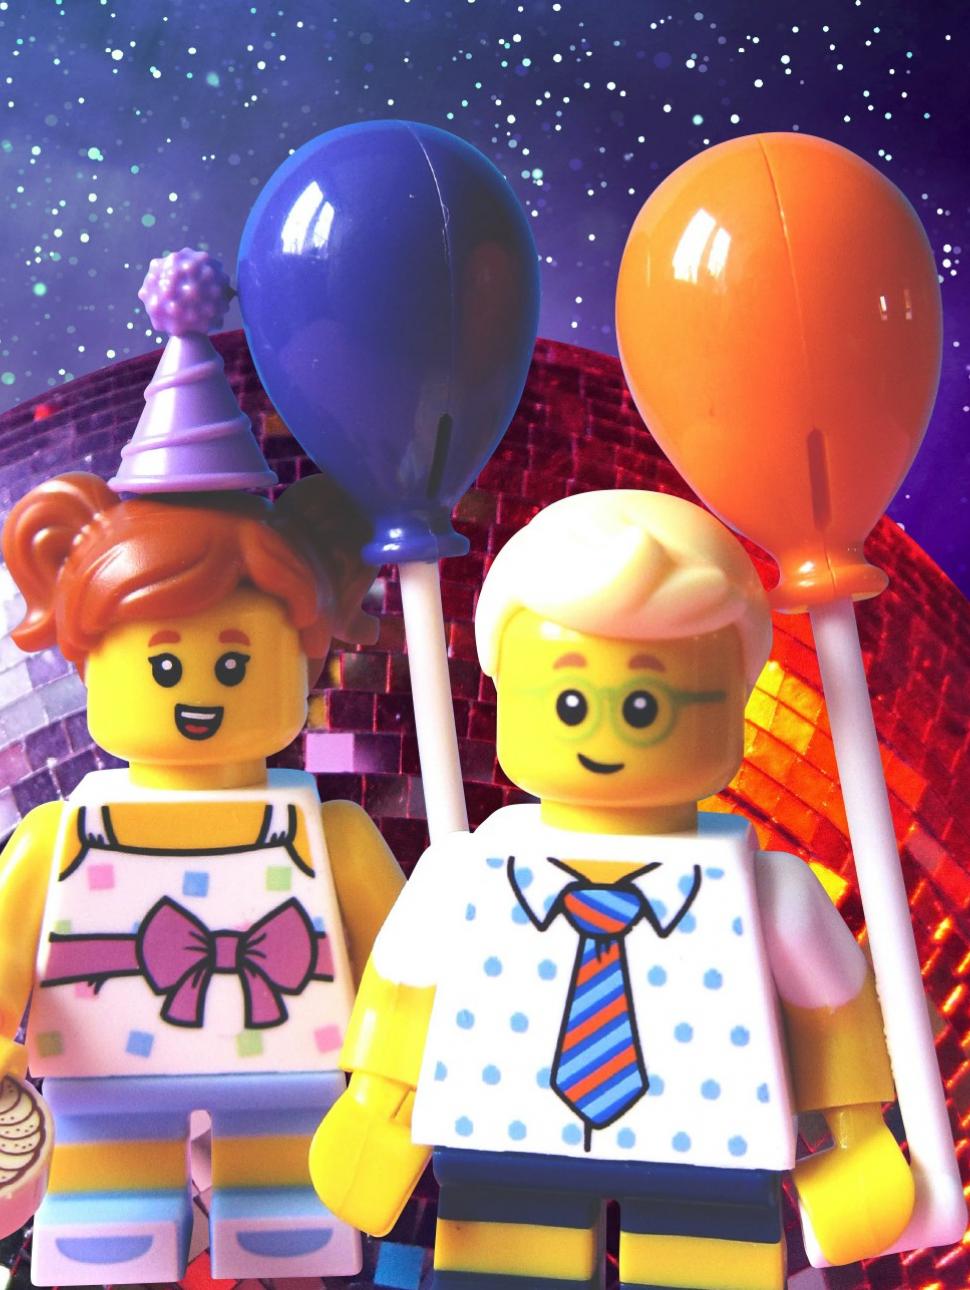 An image of a birthday LEGO minifig character in front of a disco ball 